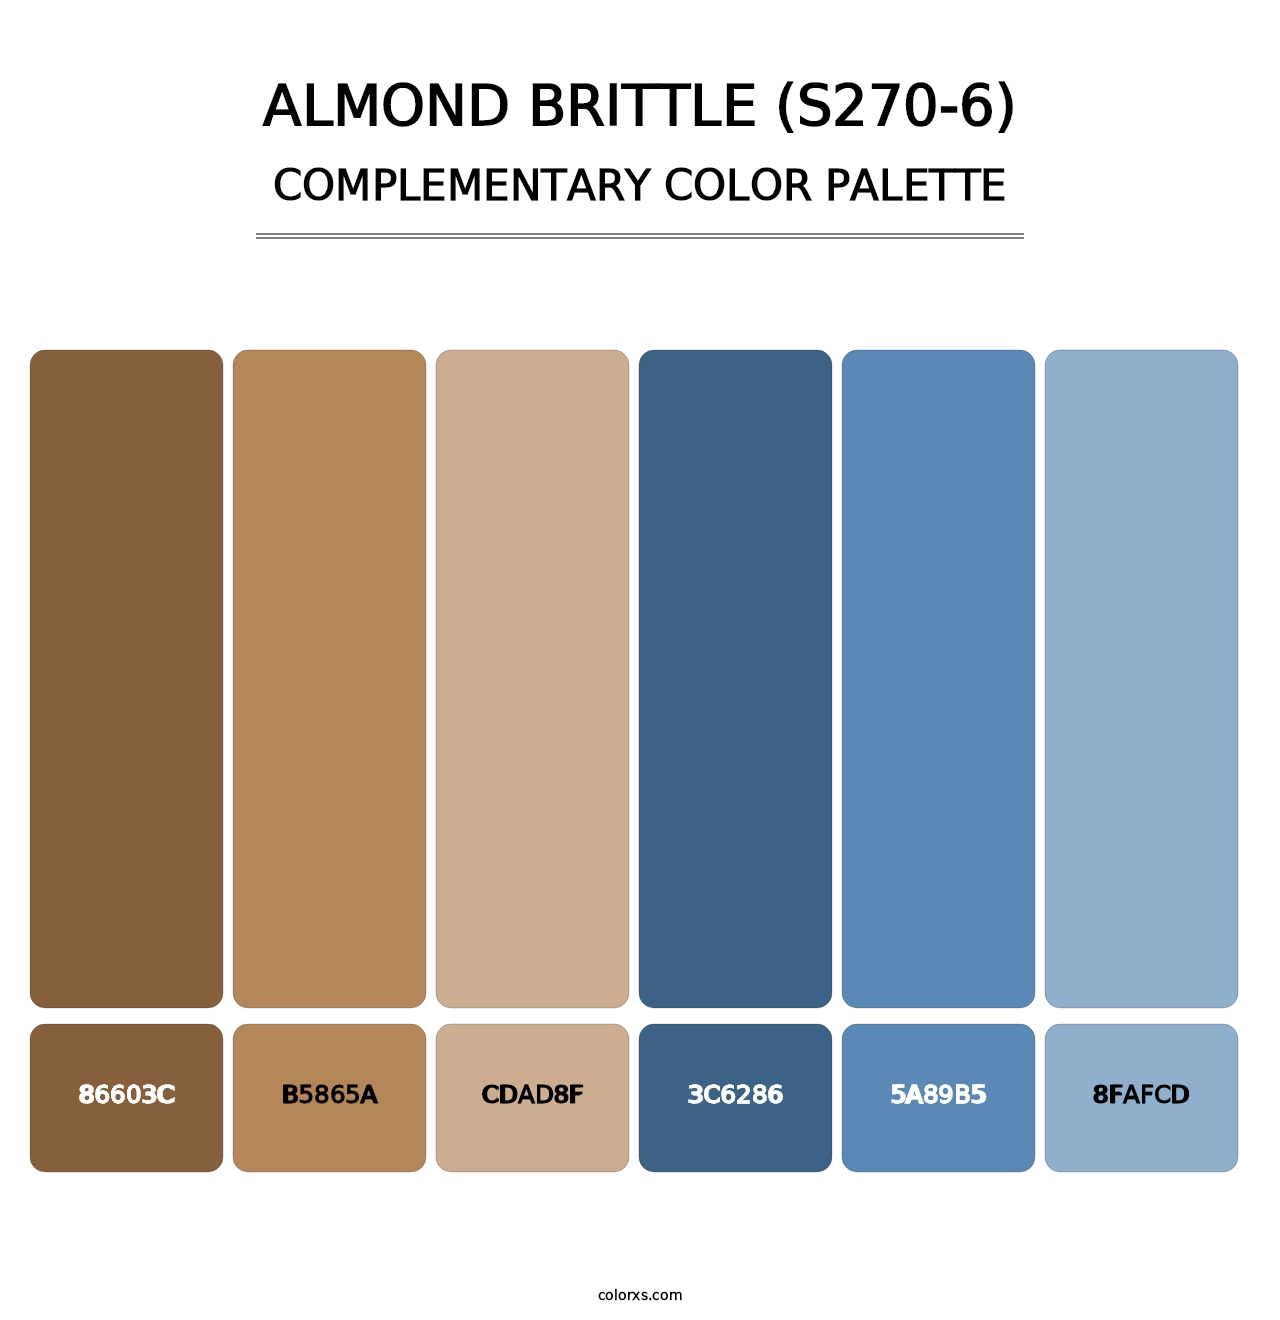 Almond Brittle (S270-6) - Complementary Color Palette